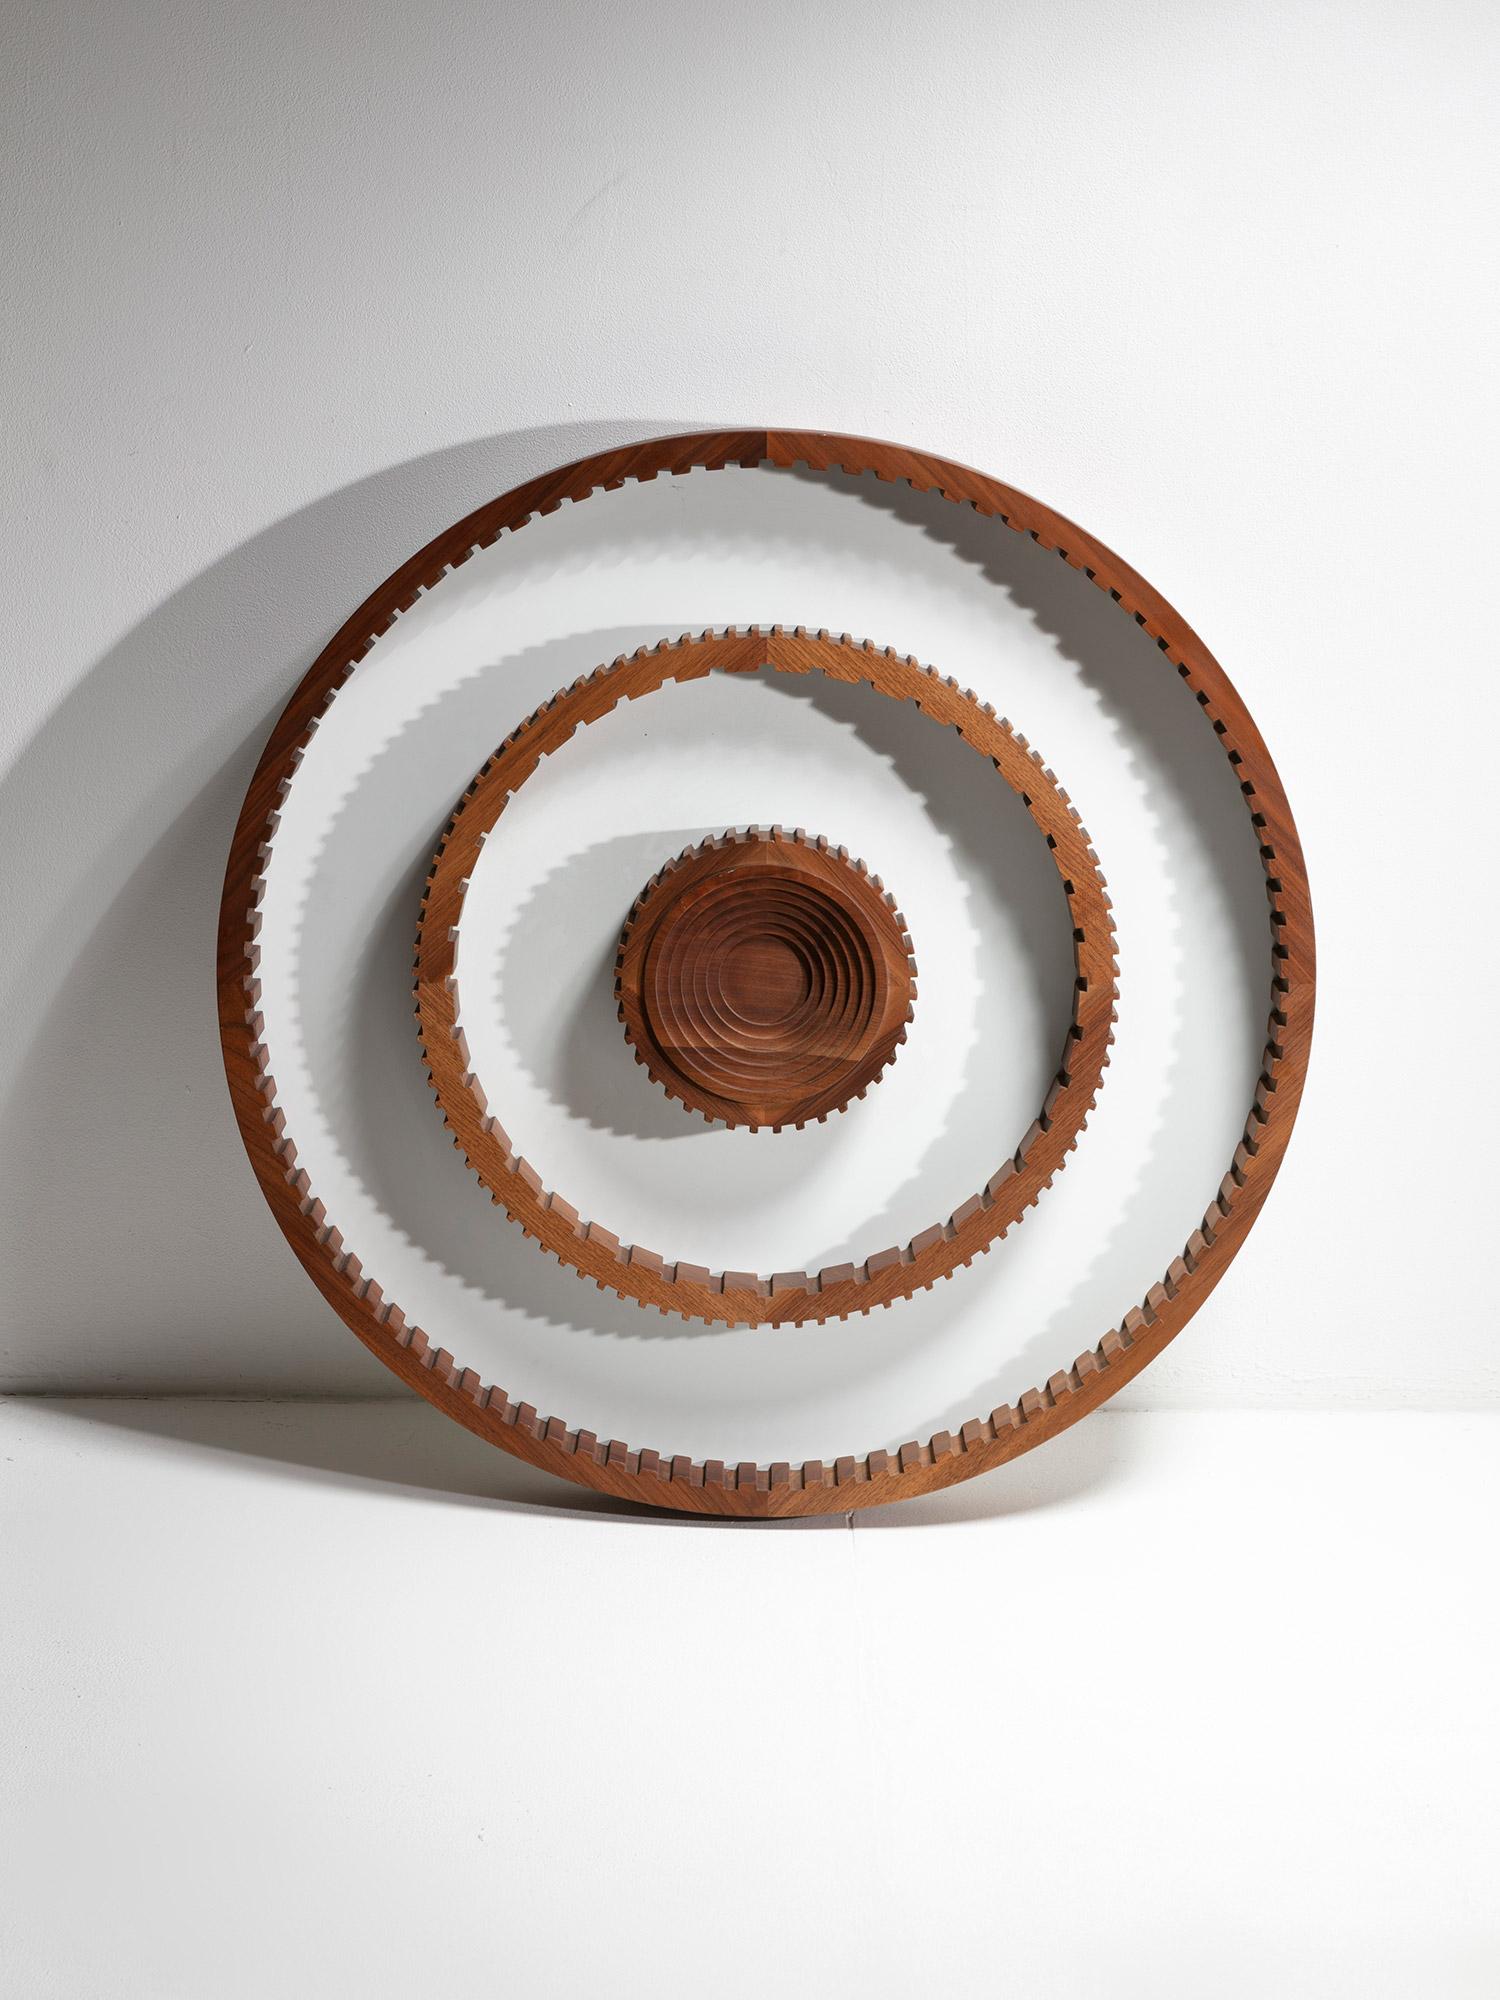 Italian 1970s round abstract wall sculpture.
Solid walnut cogwheels on white formica background generate a minimal mandala.